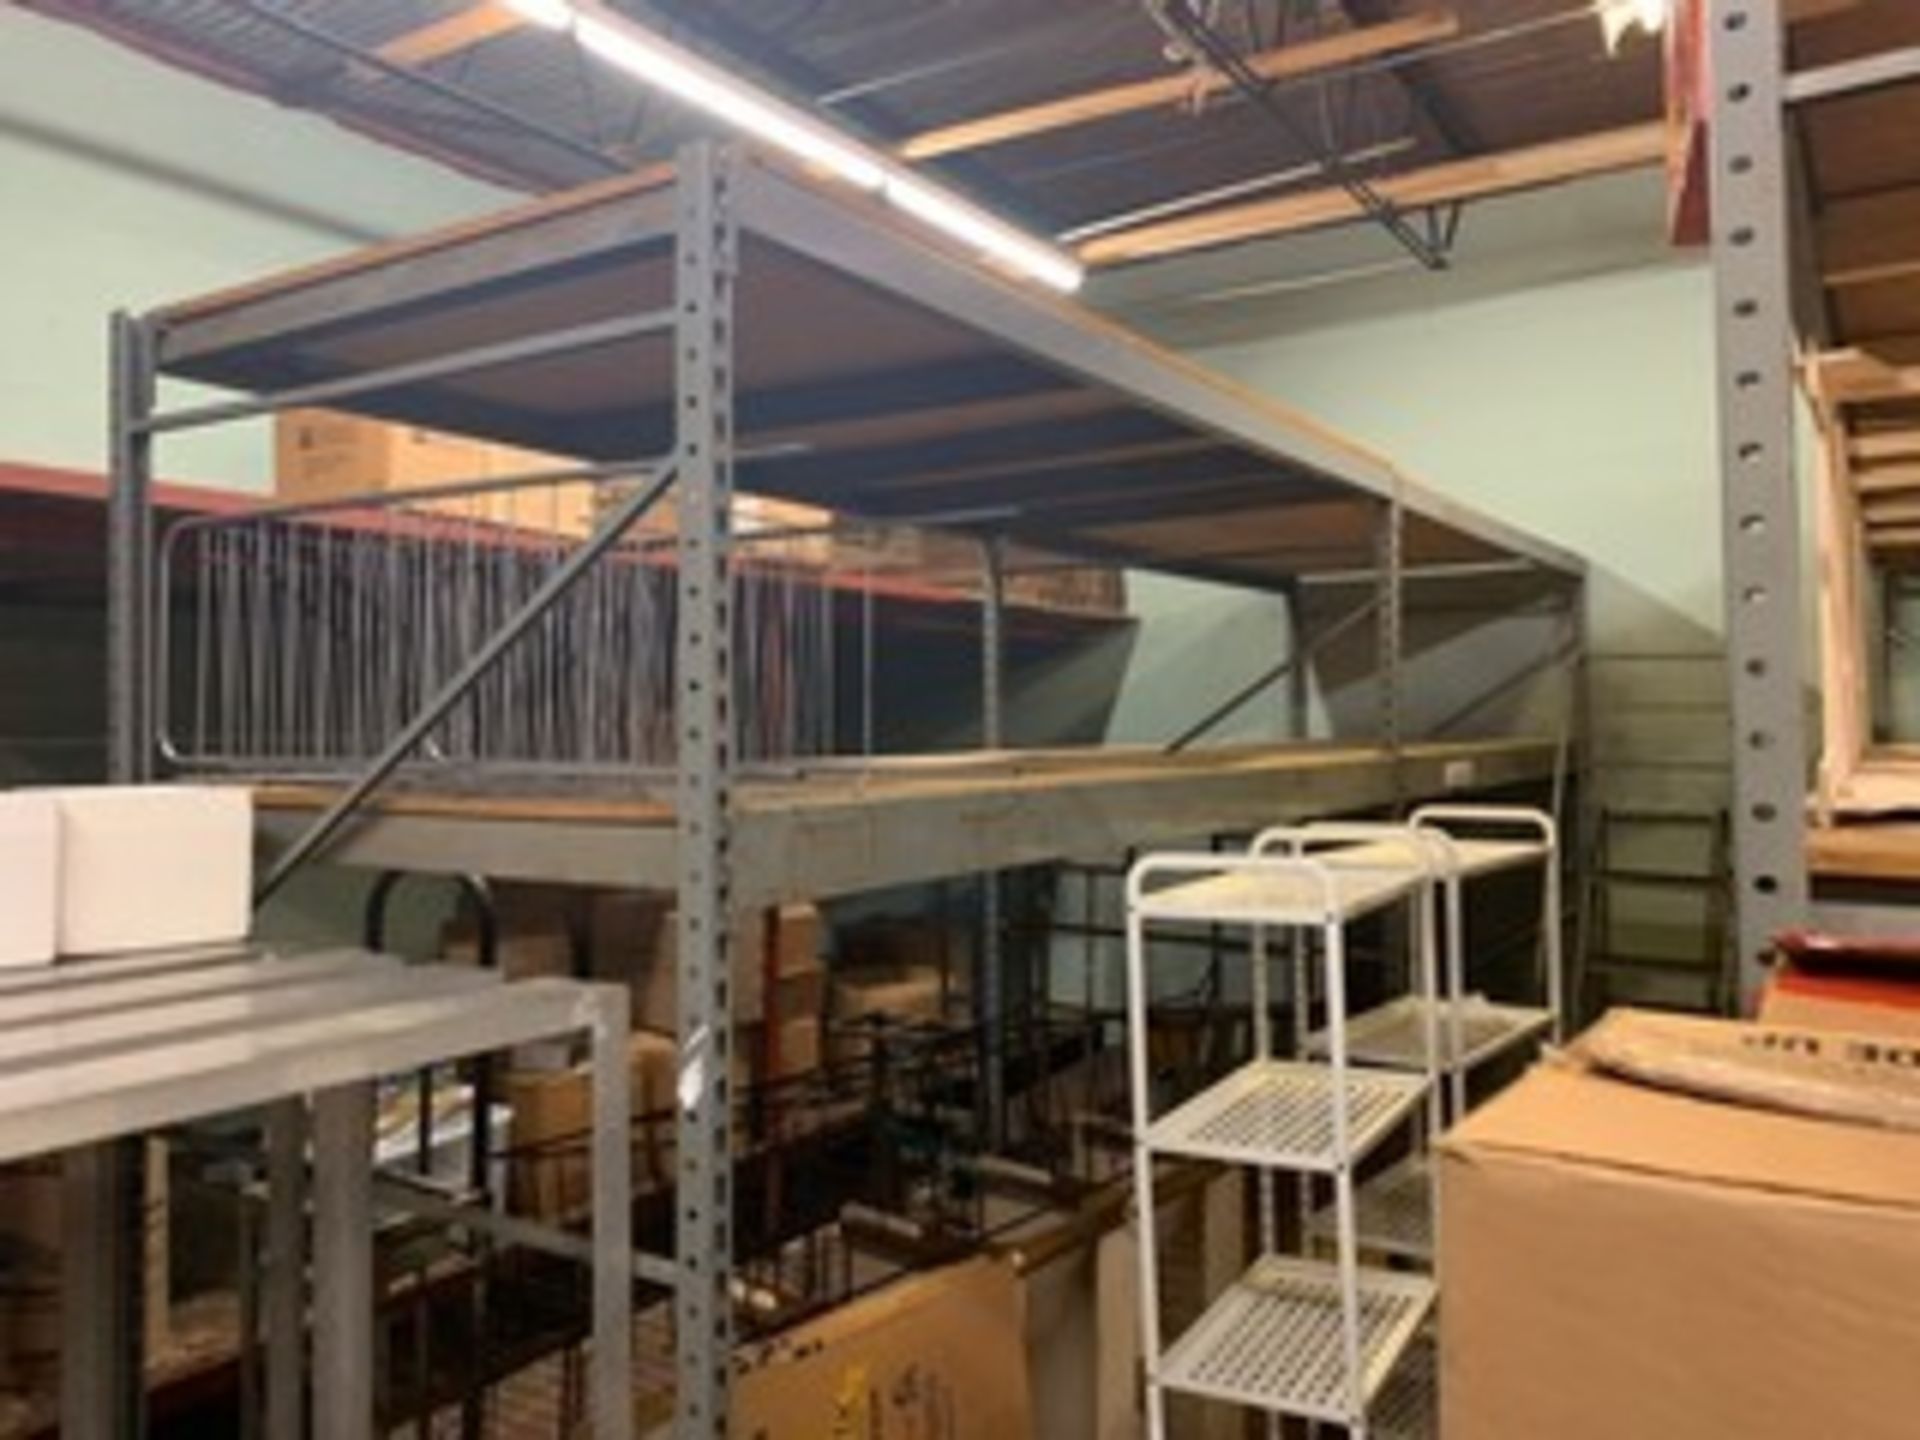 SECTIONS RACKING - 9 UPRIGHTS / 40 CROSS BEAMS